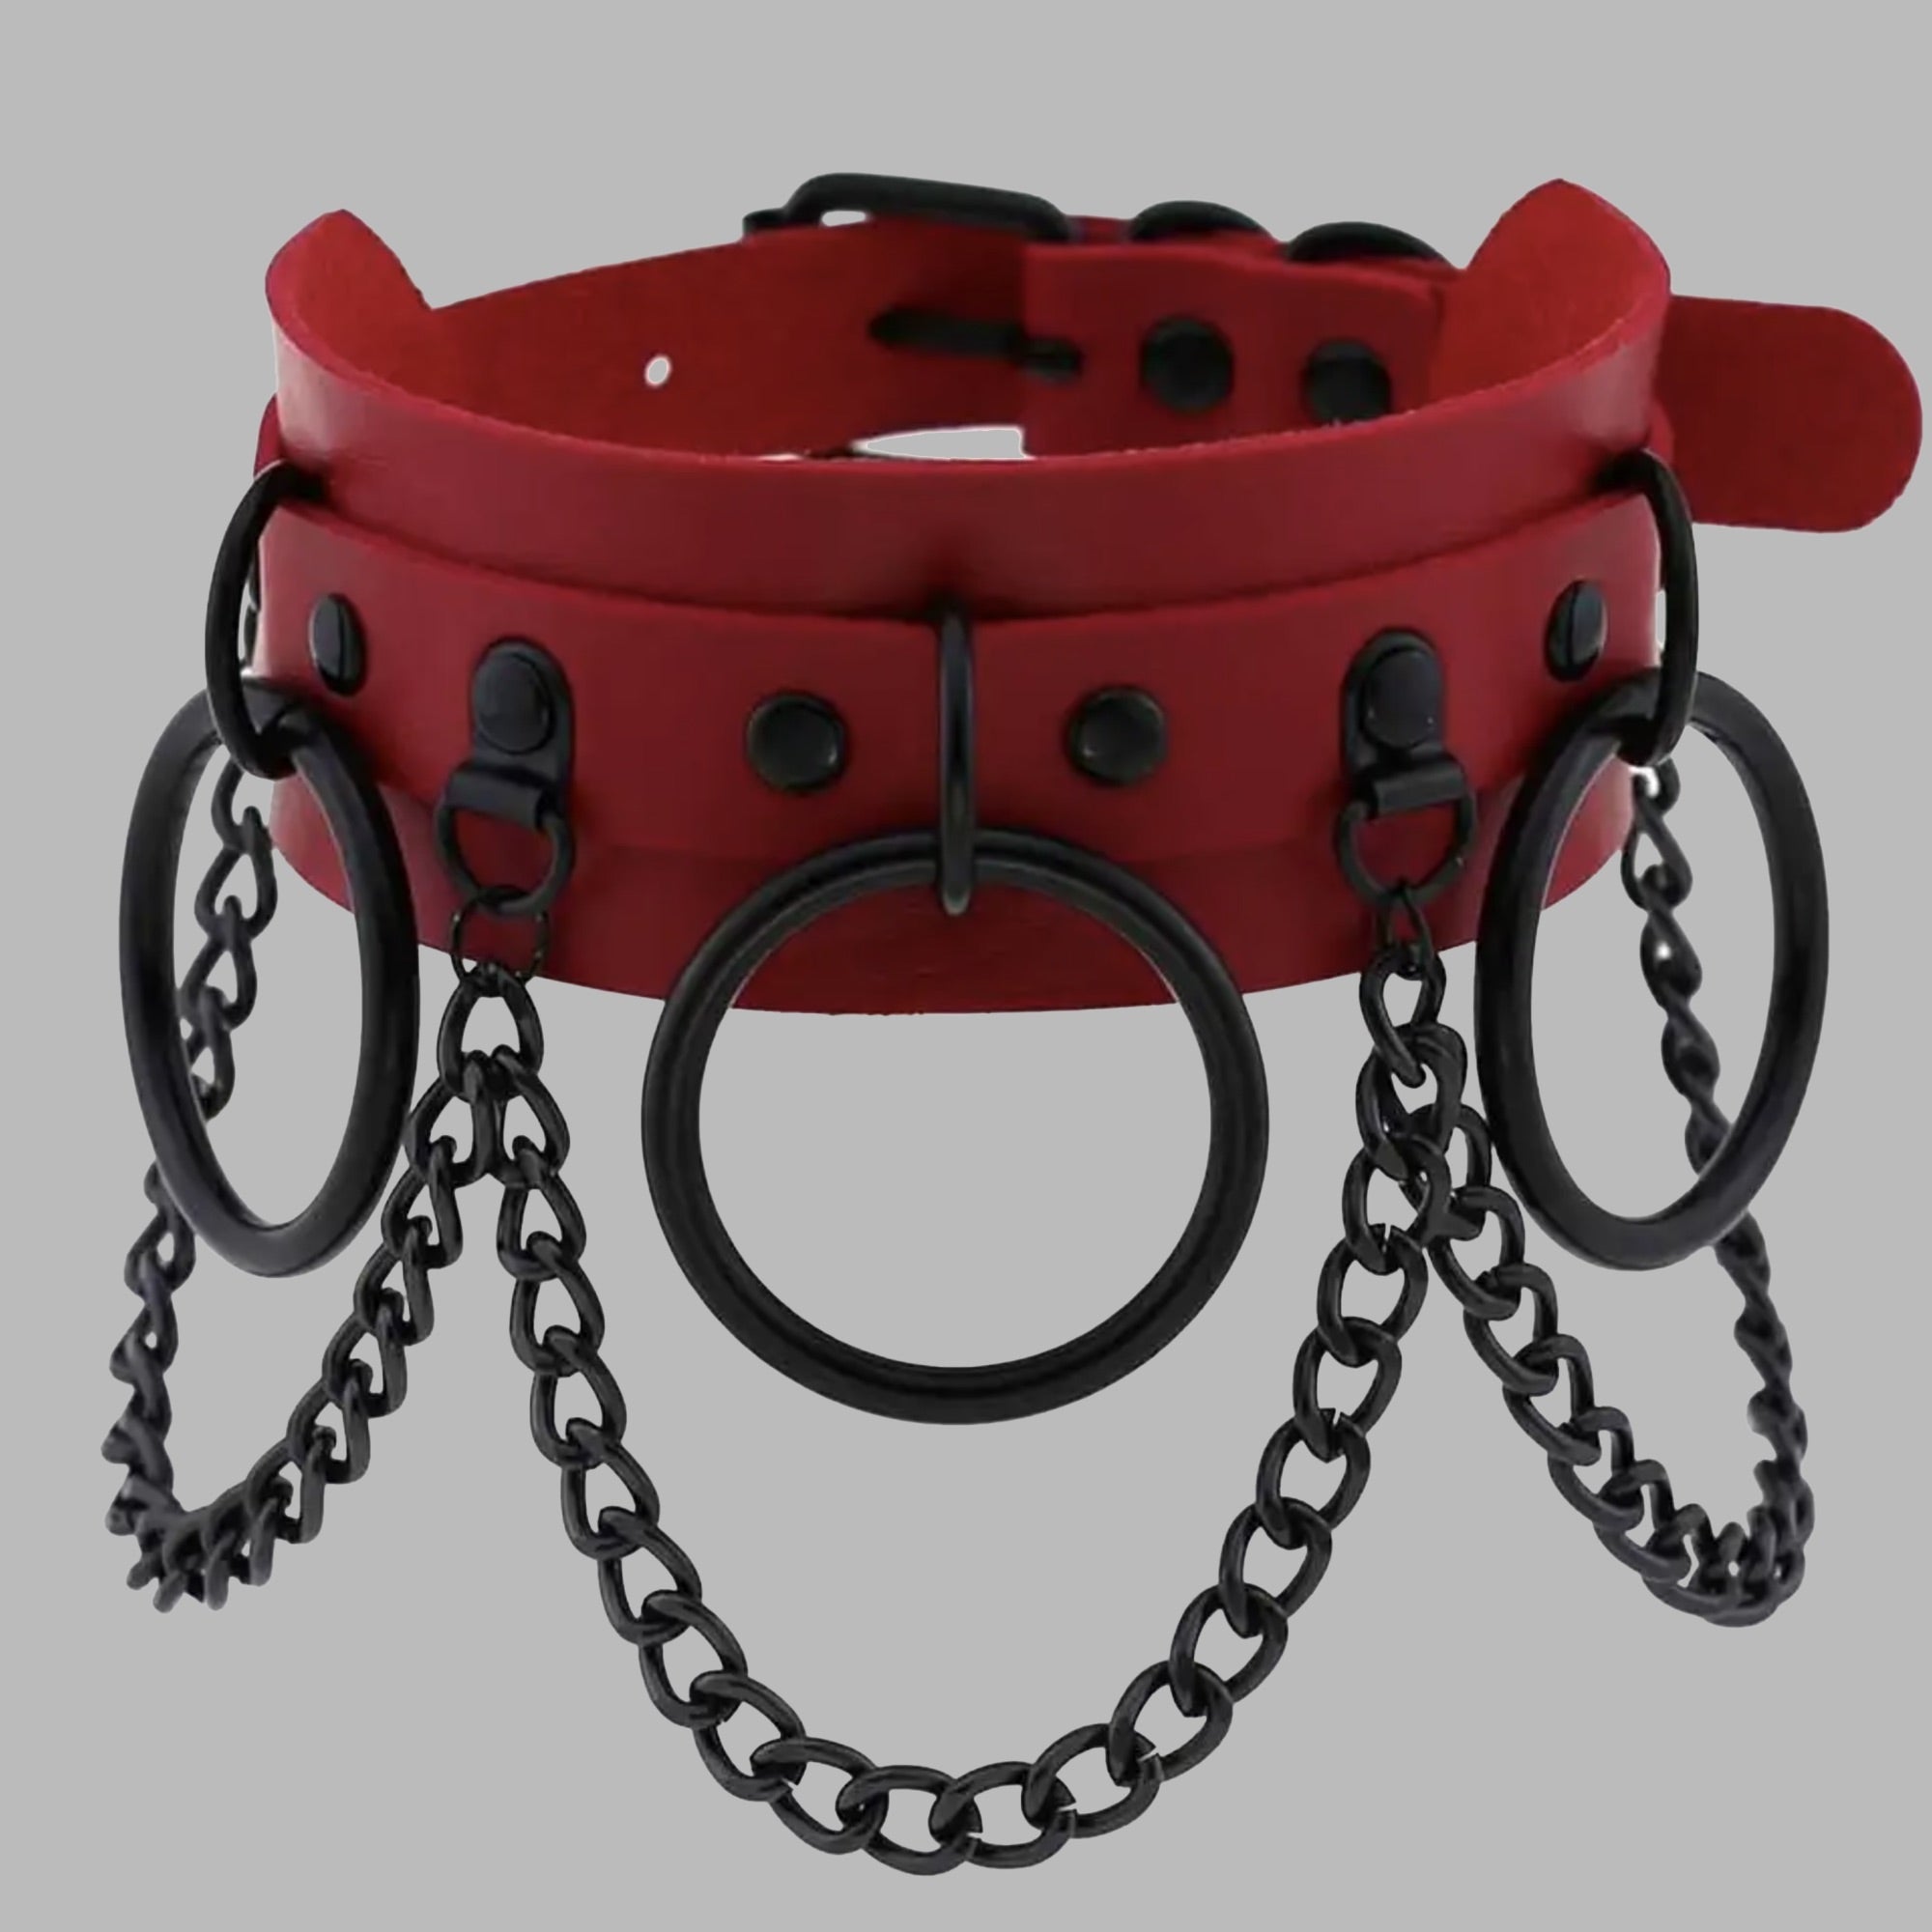 Triple O Ring & Chains Collar - Red & Black